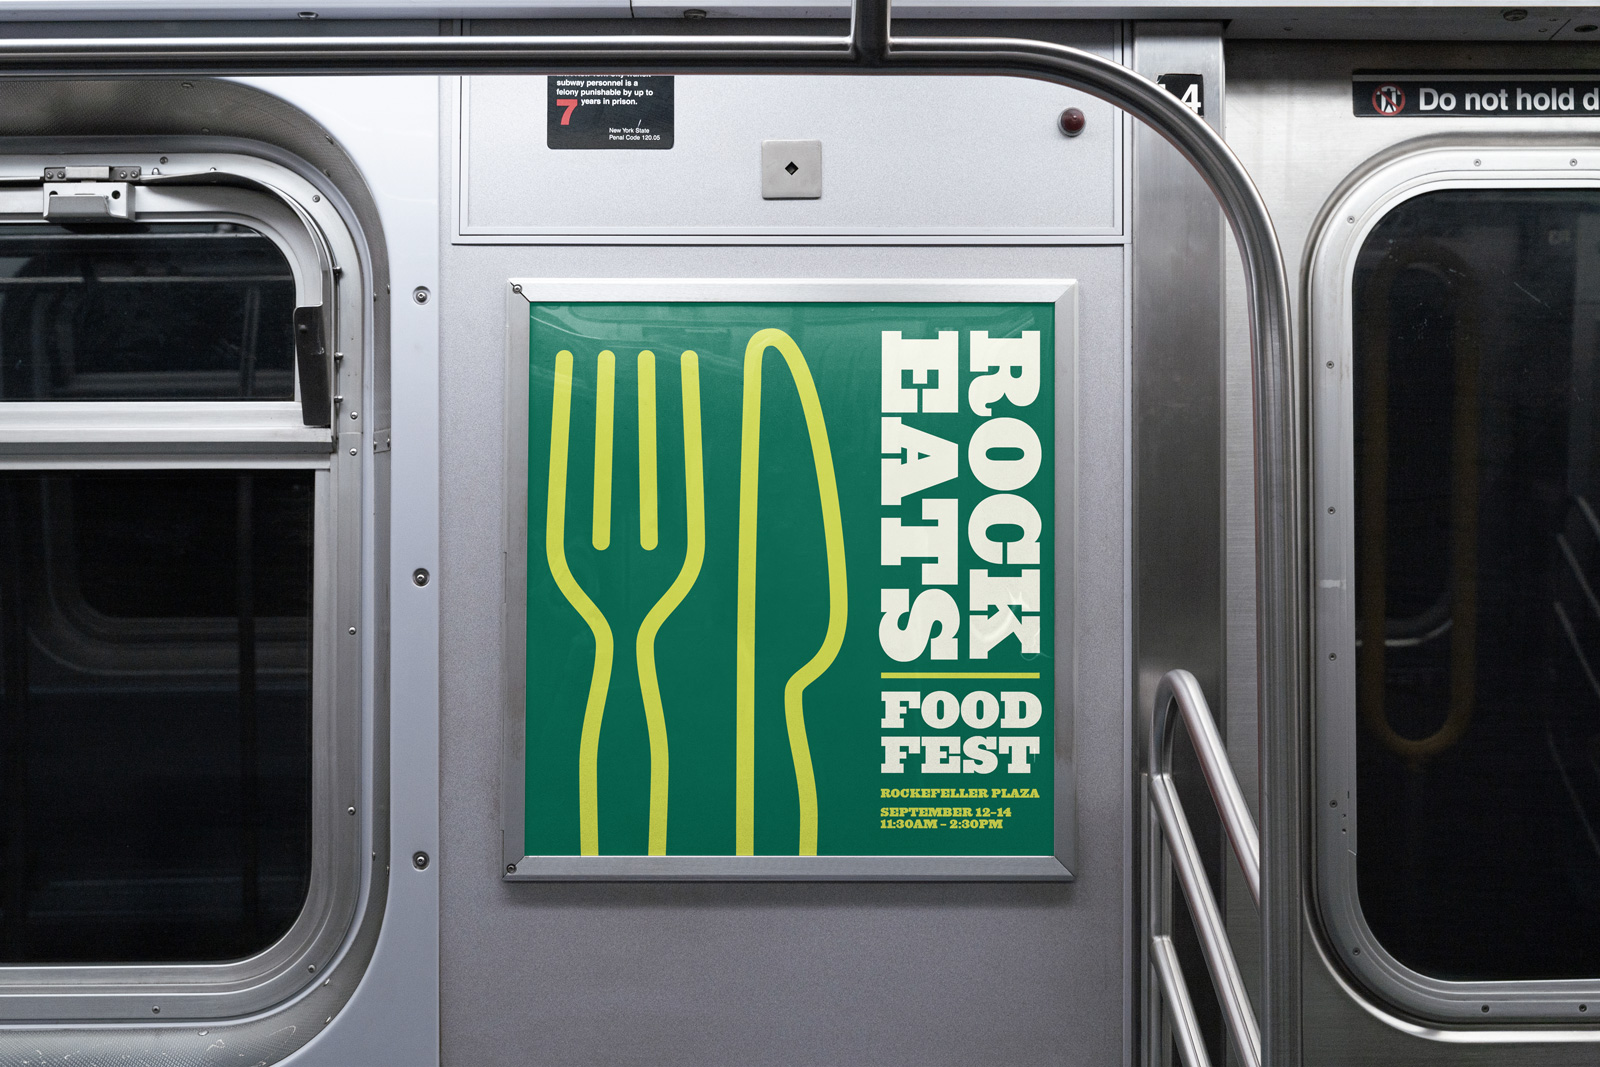 Ad campaign for Fall Rock Eats Food Fest